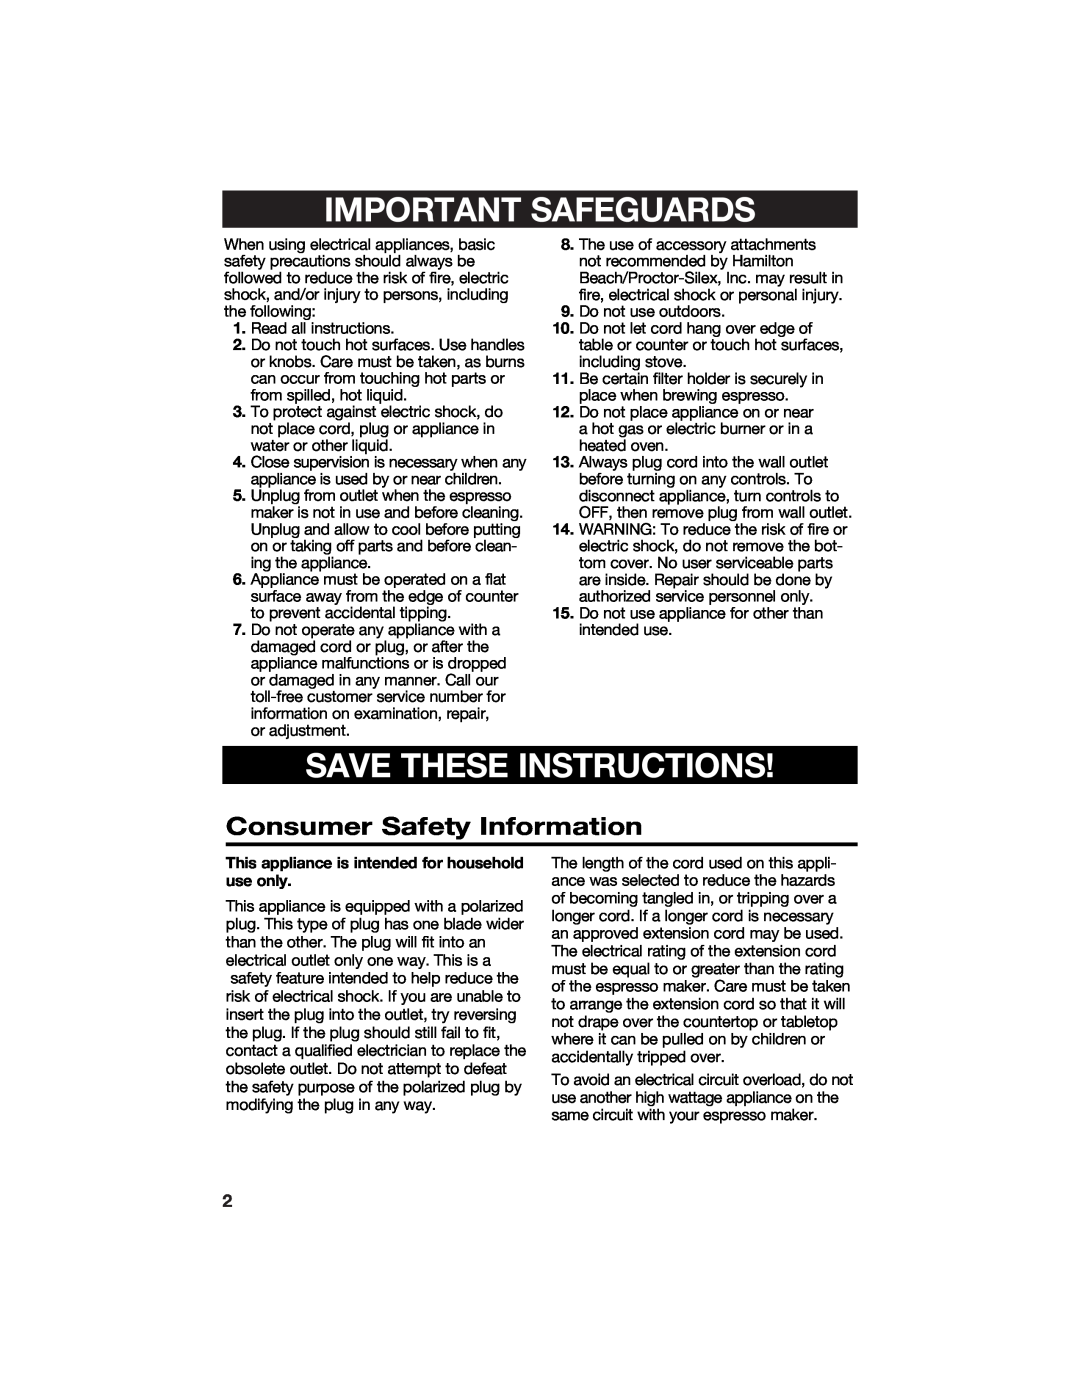 Hamilton Beach Cappuccino Plus specifications Consumer Safety Information, Important Safeguards, Save These Instructions 